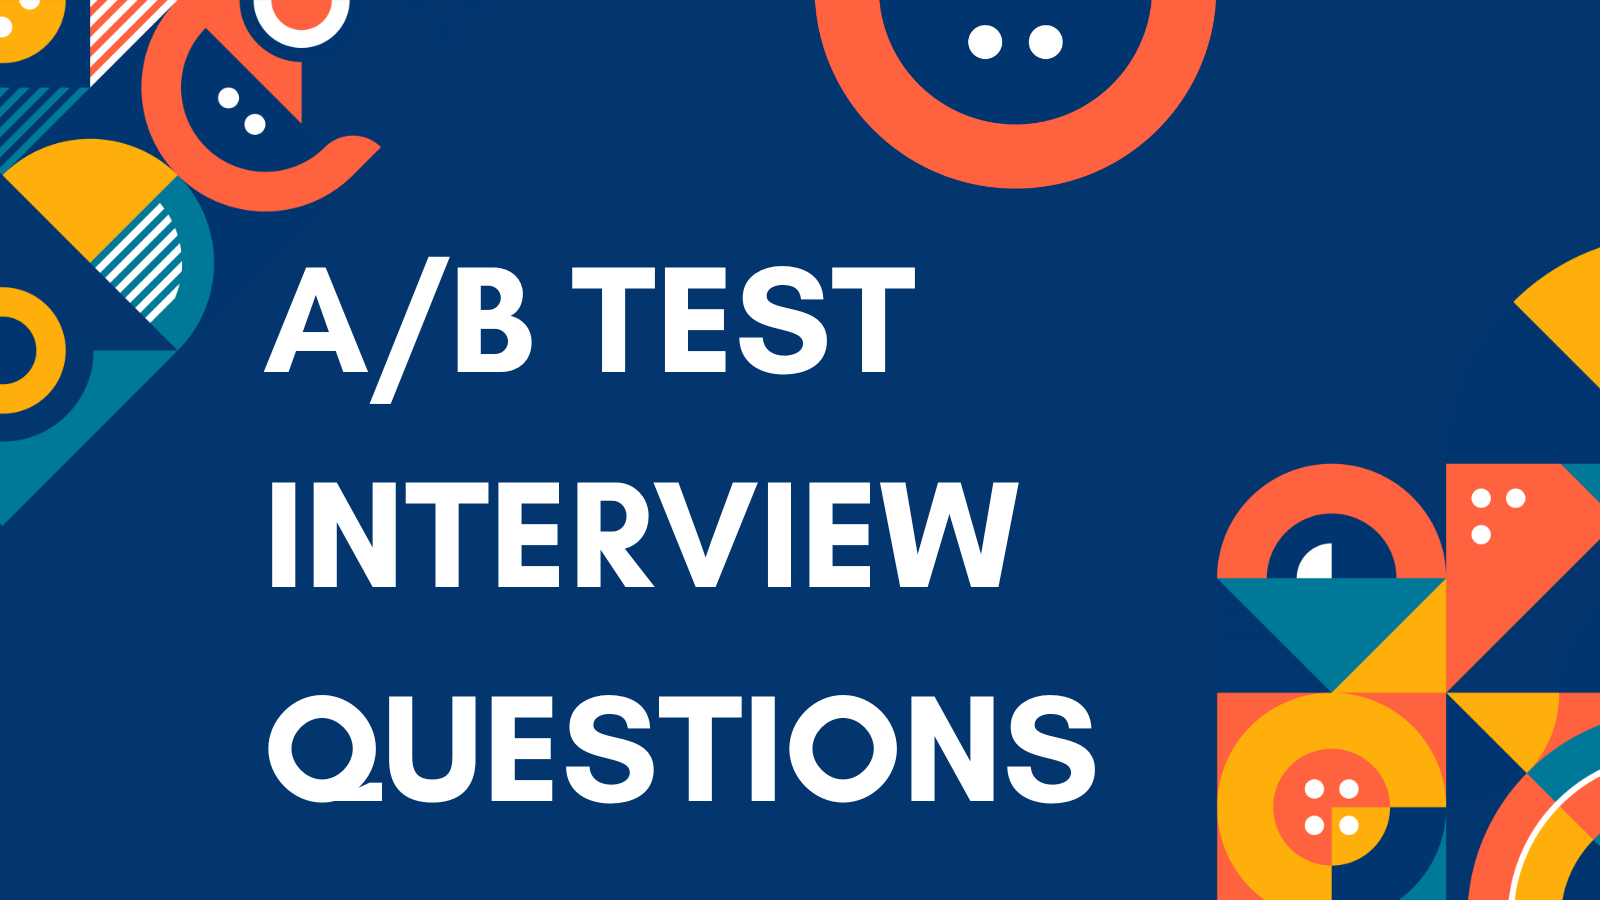 Preparing for interview: A/B Tests